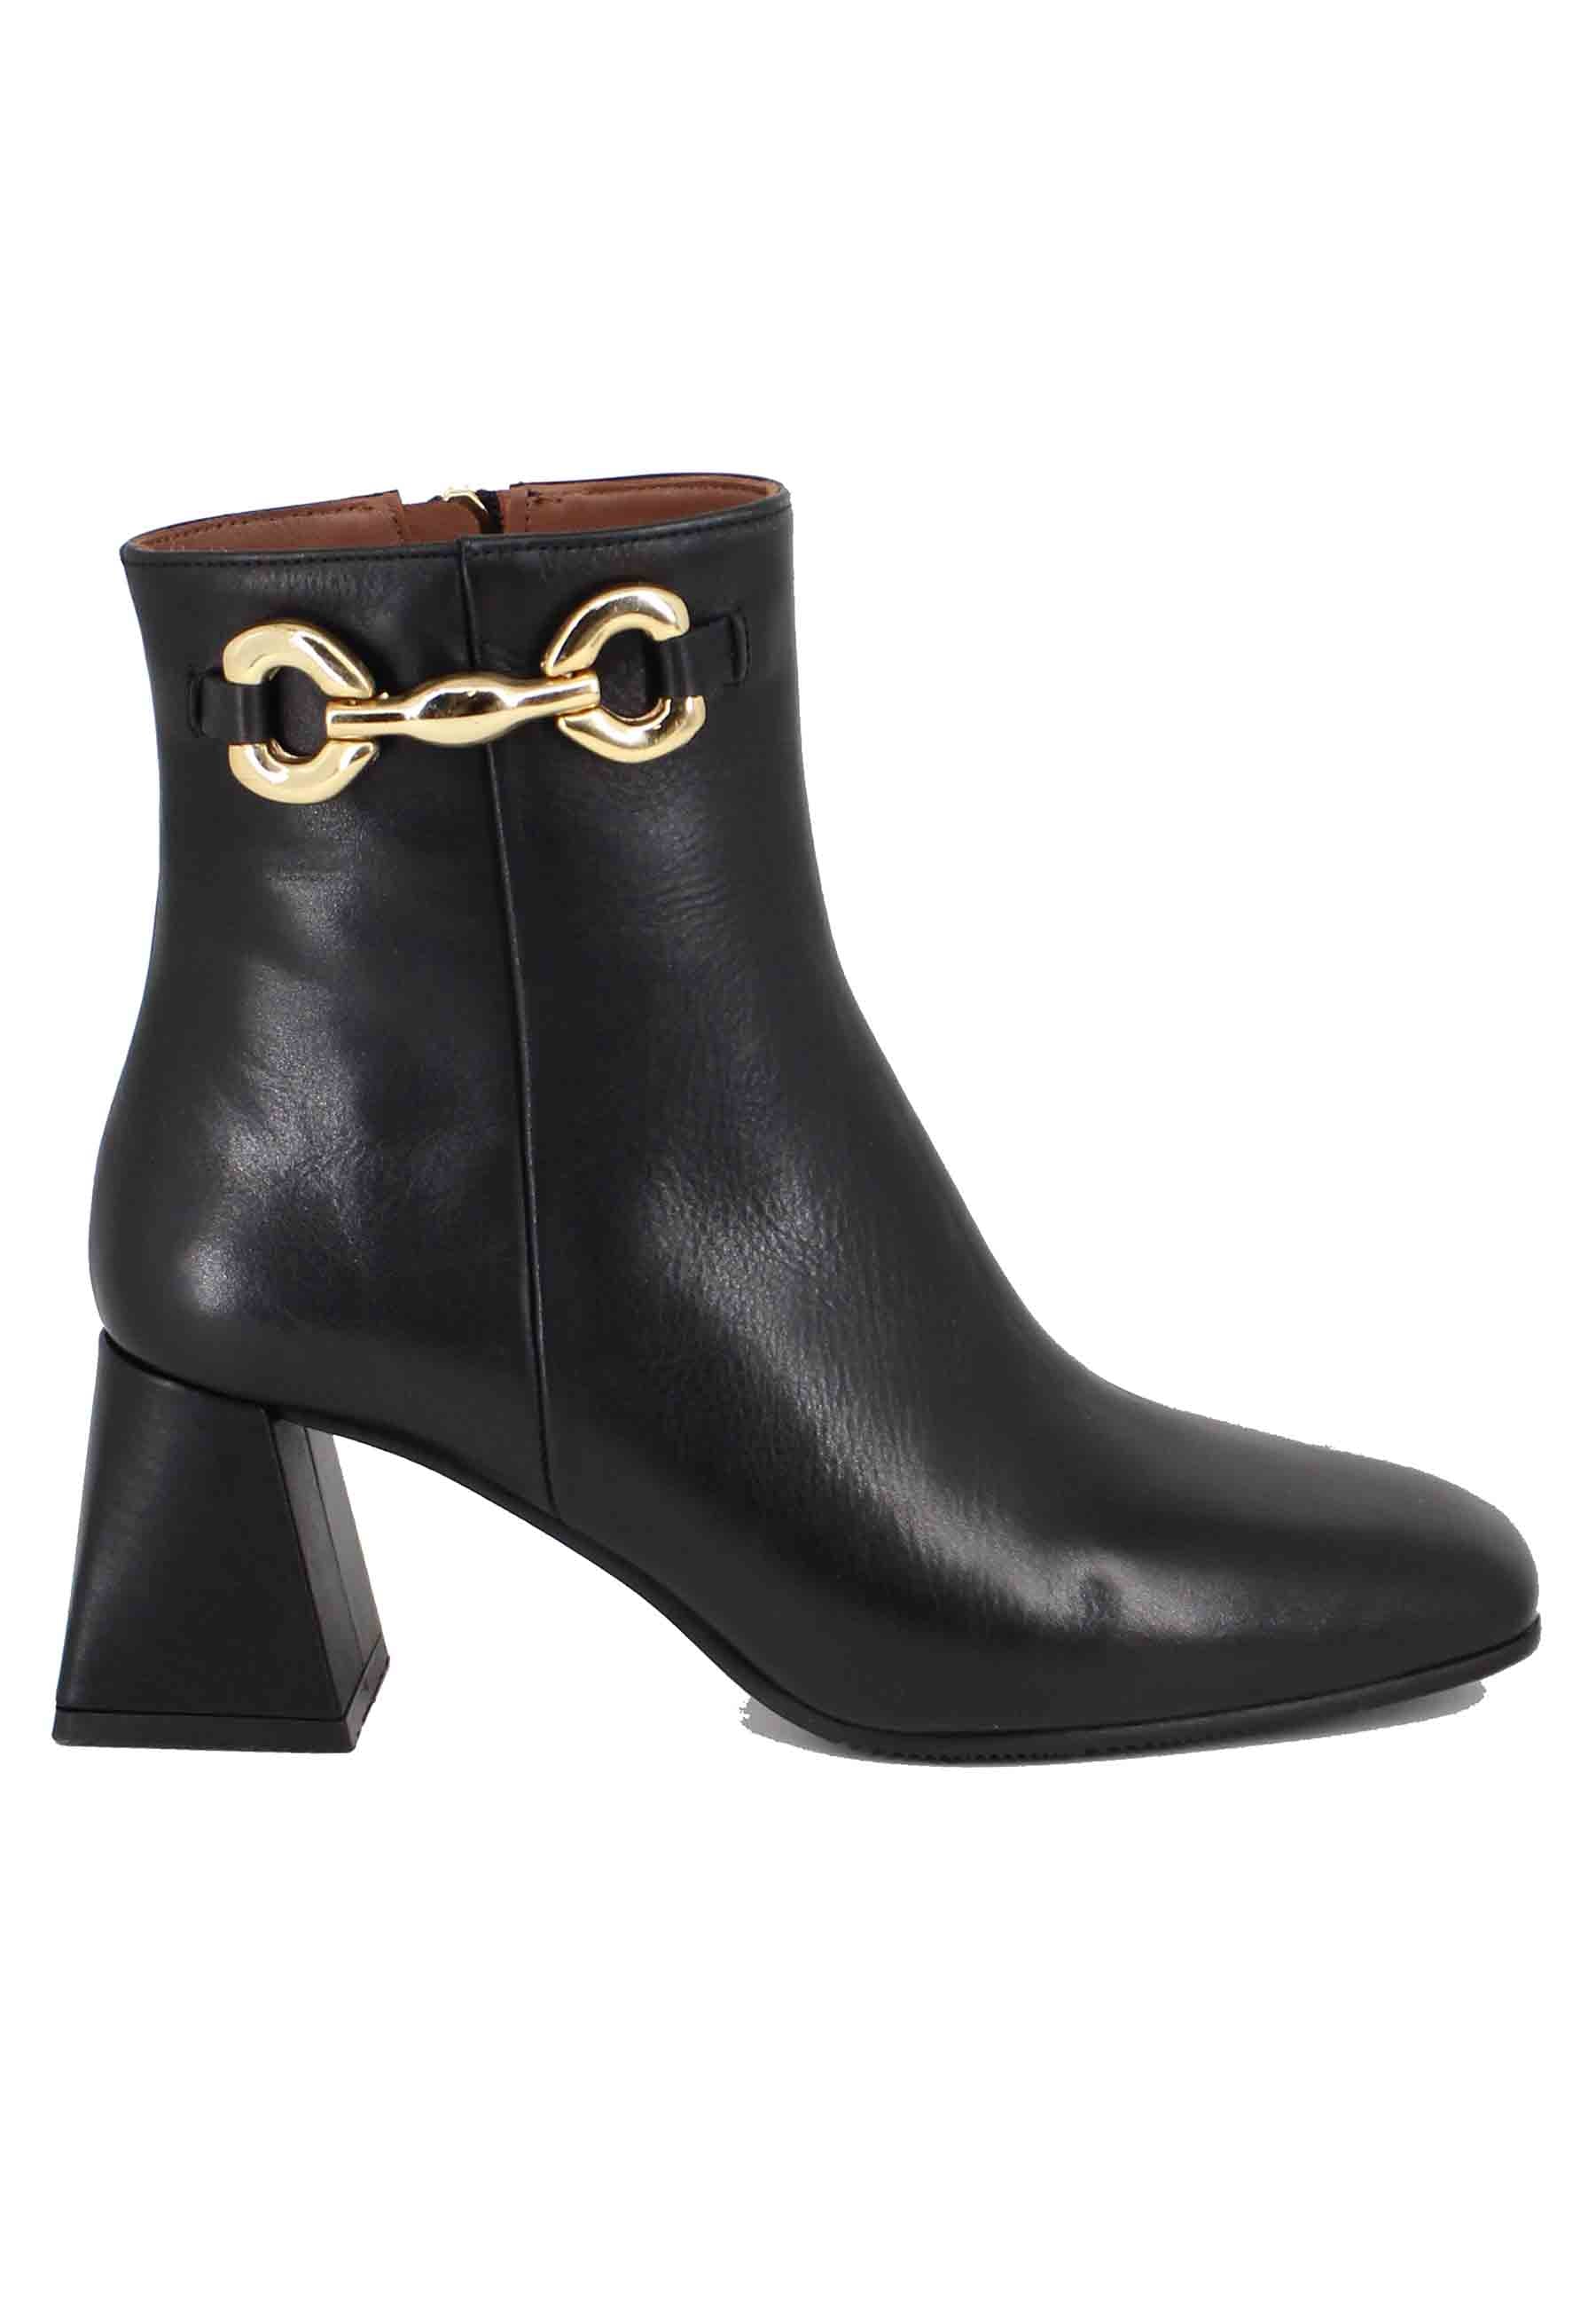 Women's black leather ankle boots with gold clamp